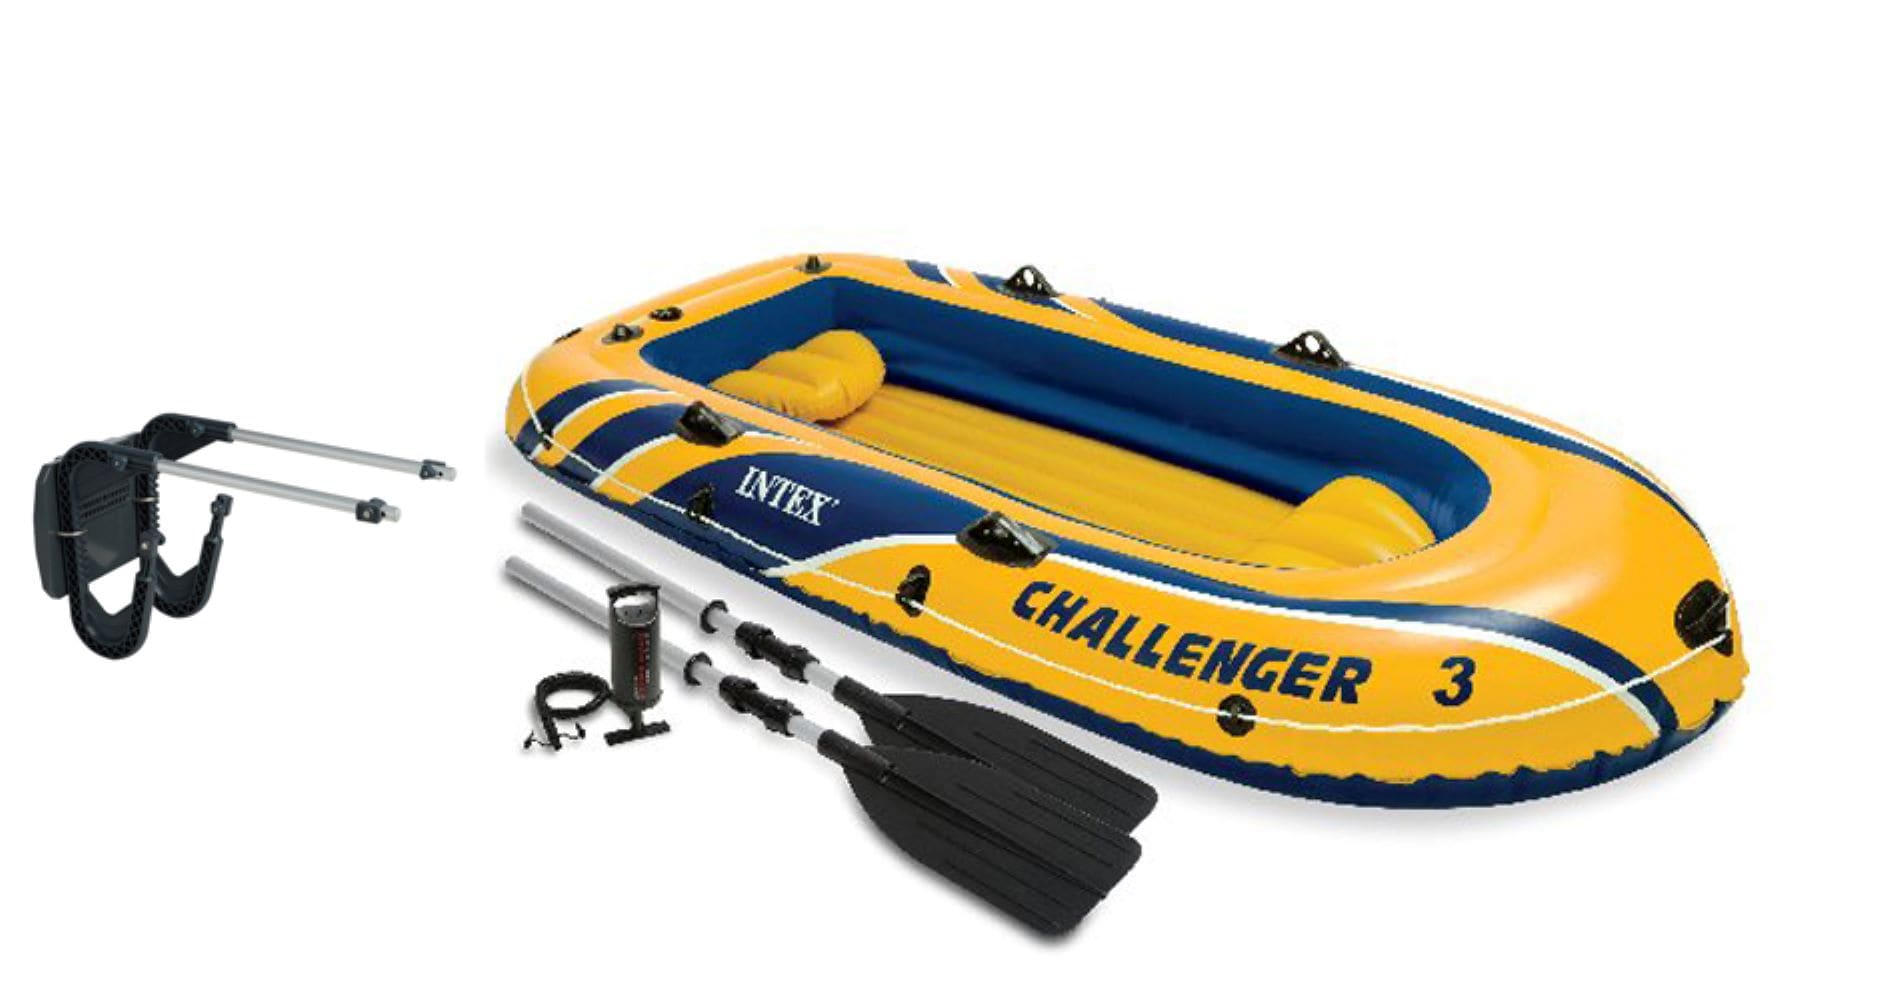 Intex Challenger 3 Boat 2 Person Raft & Oar Set Inflatable with Motor Mount Kit